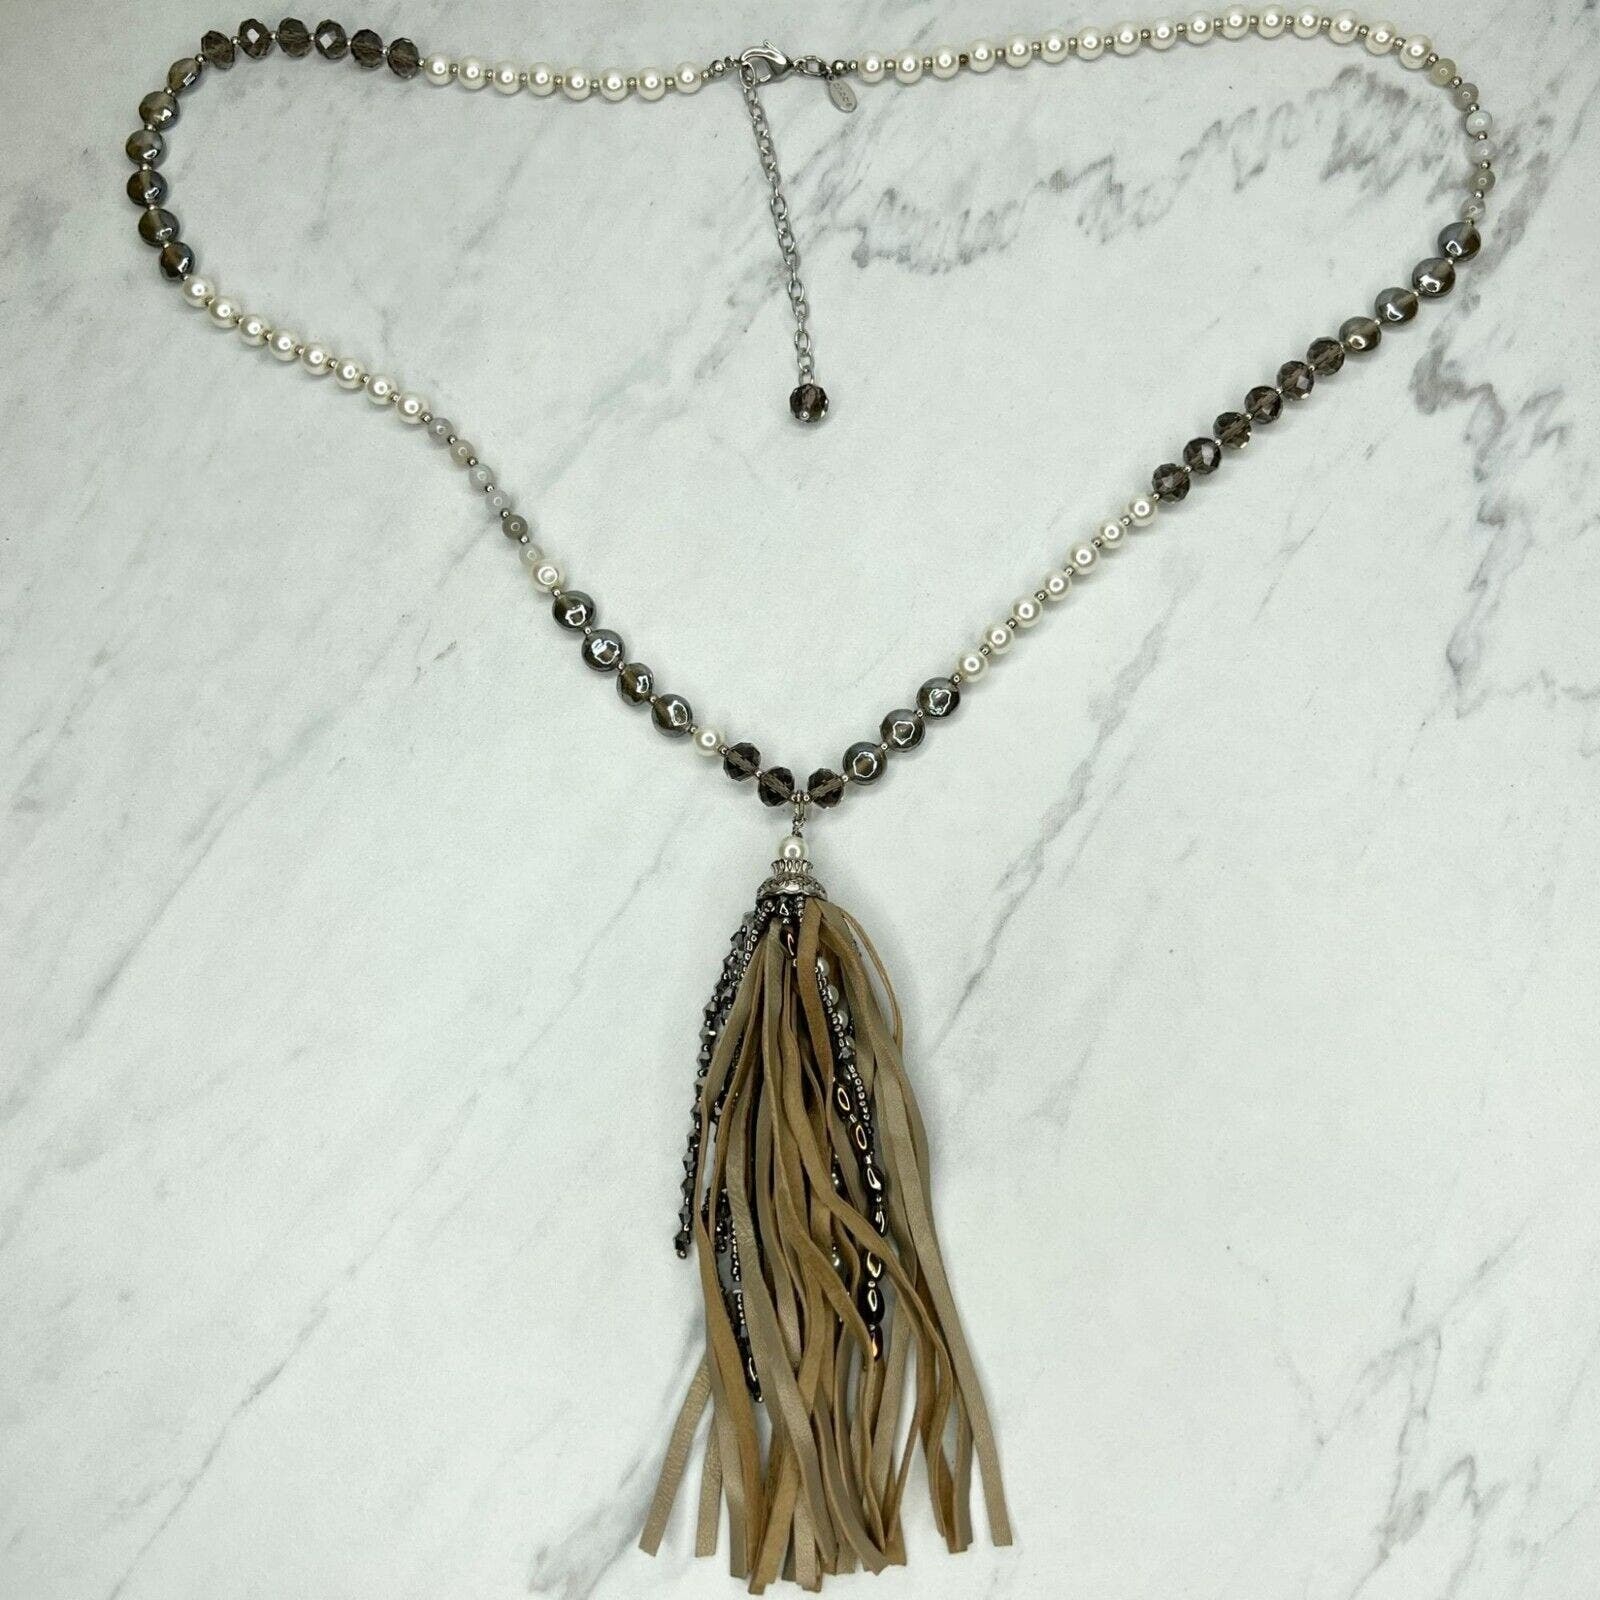 Primary image for Chico's Silver Tone Faux Pearl Beaded Tassel Pendant Necklace